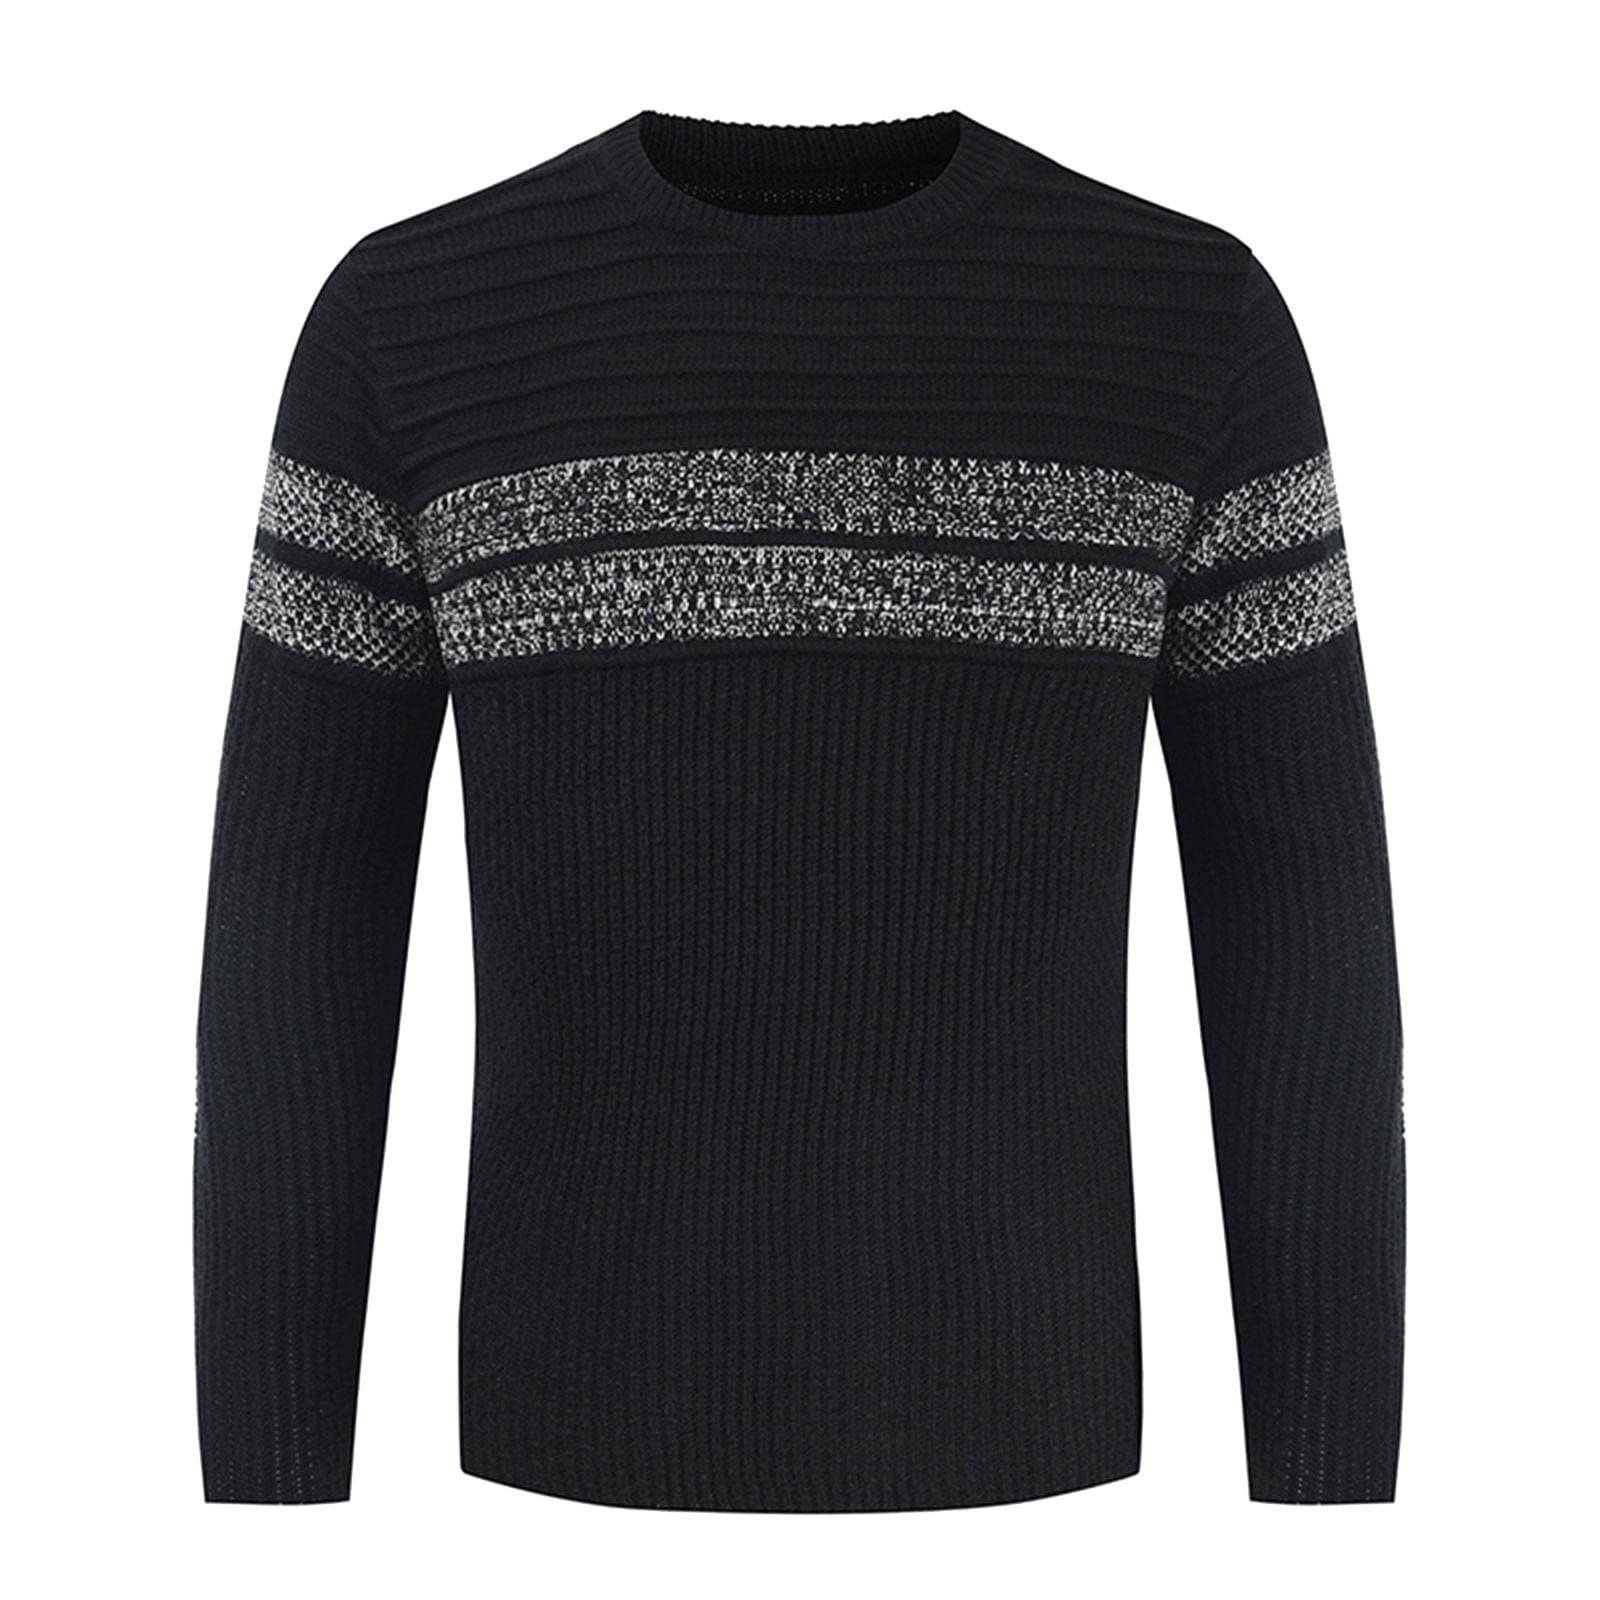 Cethrio Mens Sweaters Big and Tall Crew Neck Patchwork Striped Black ...